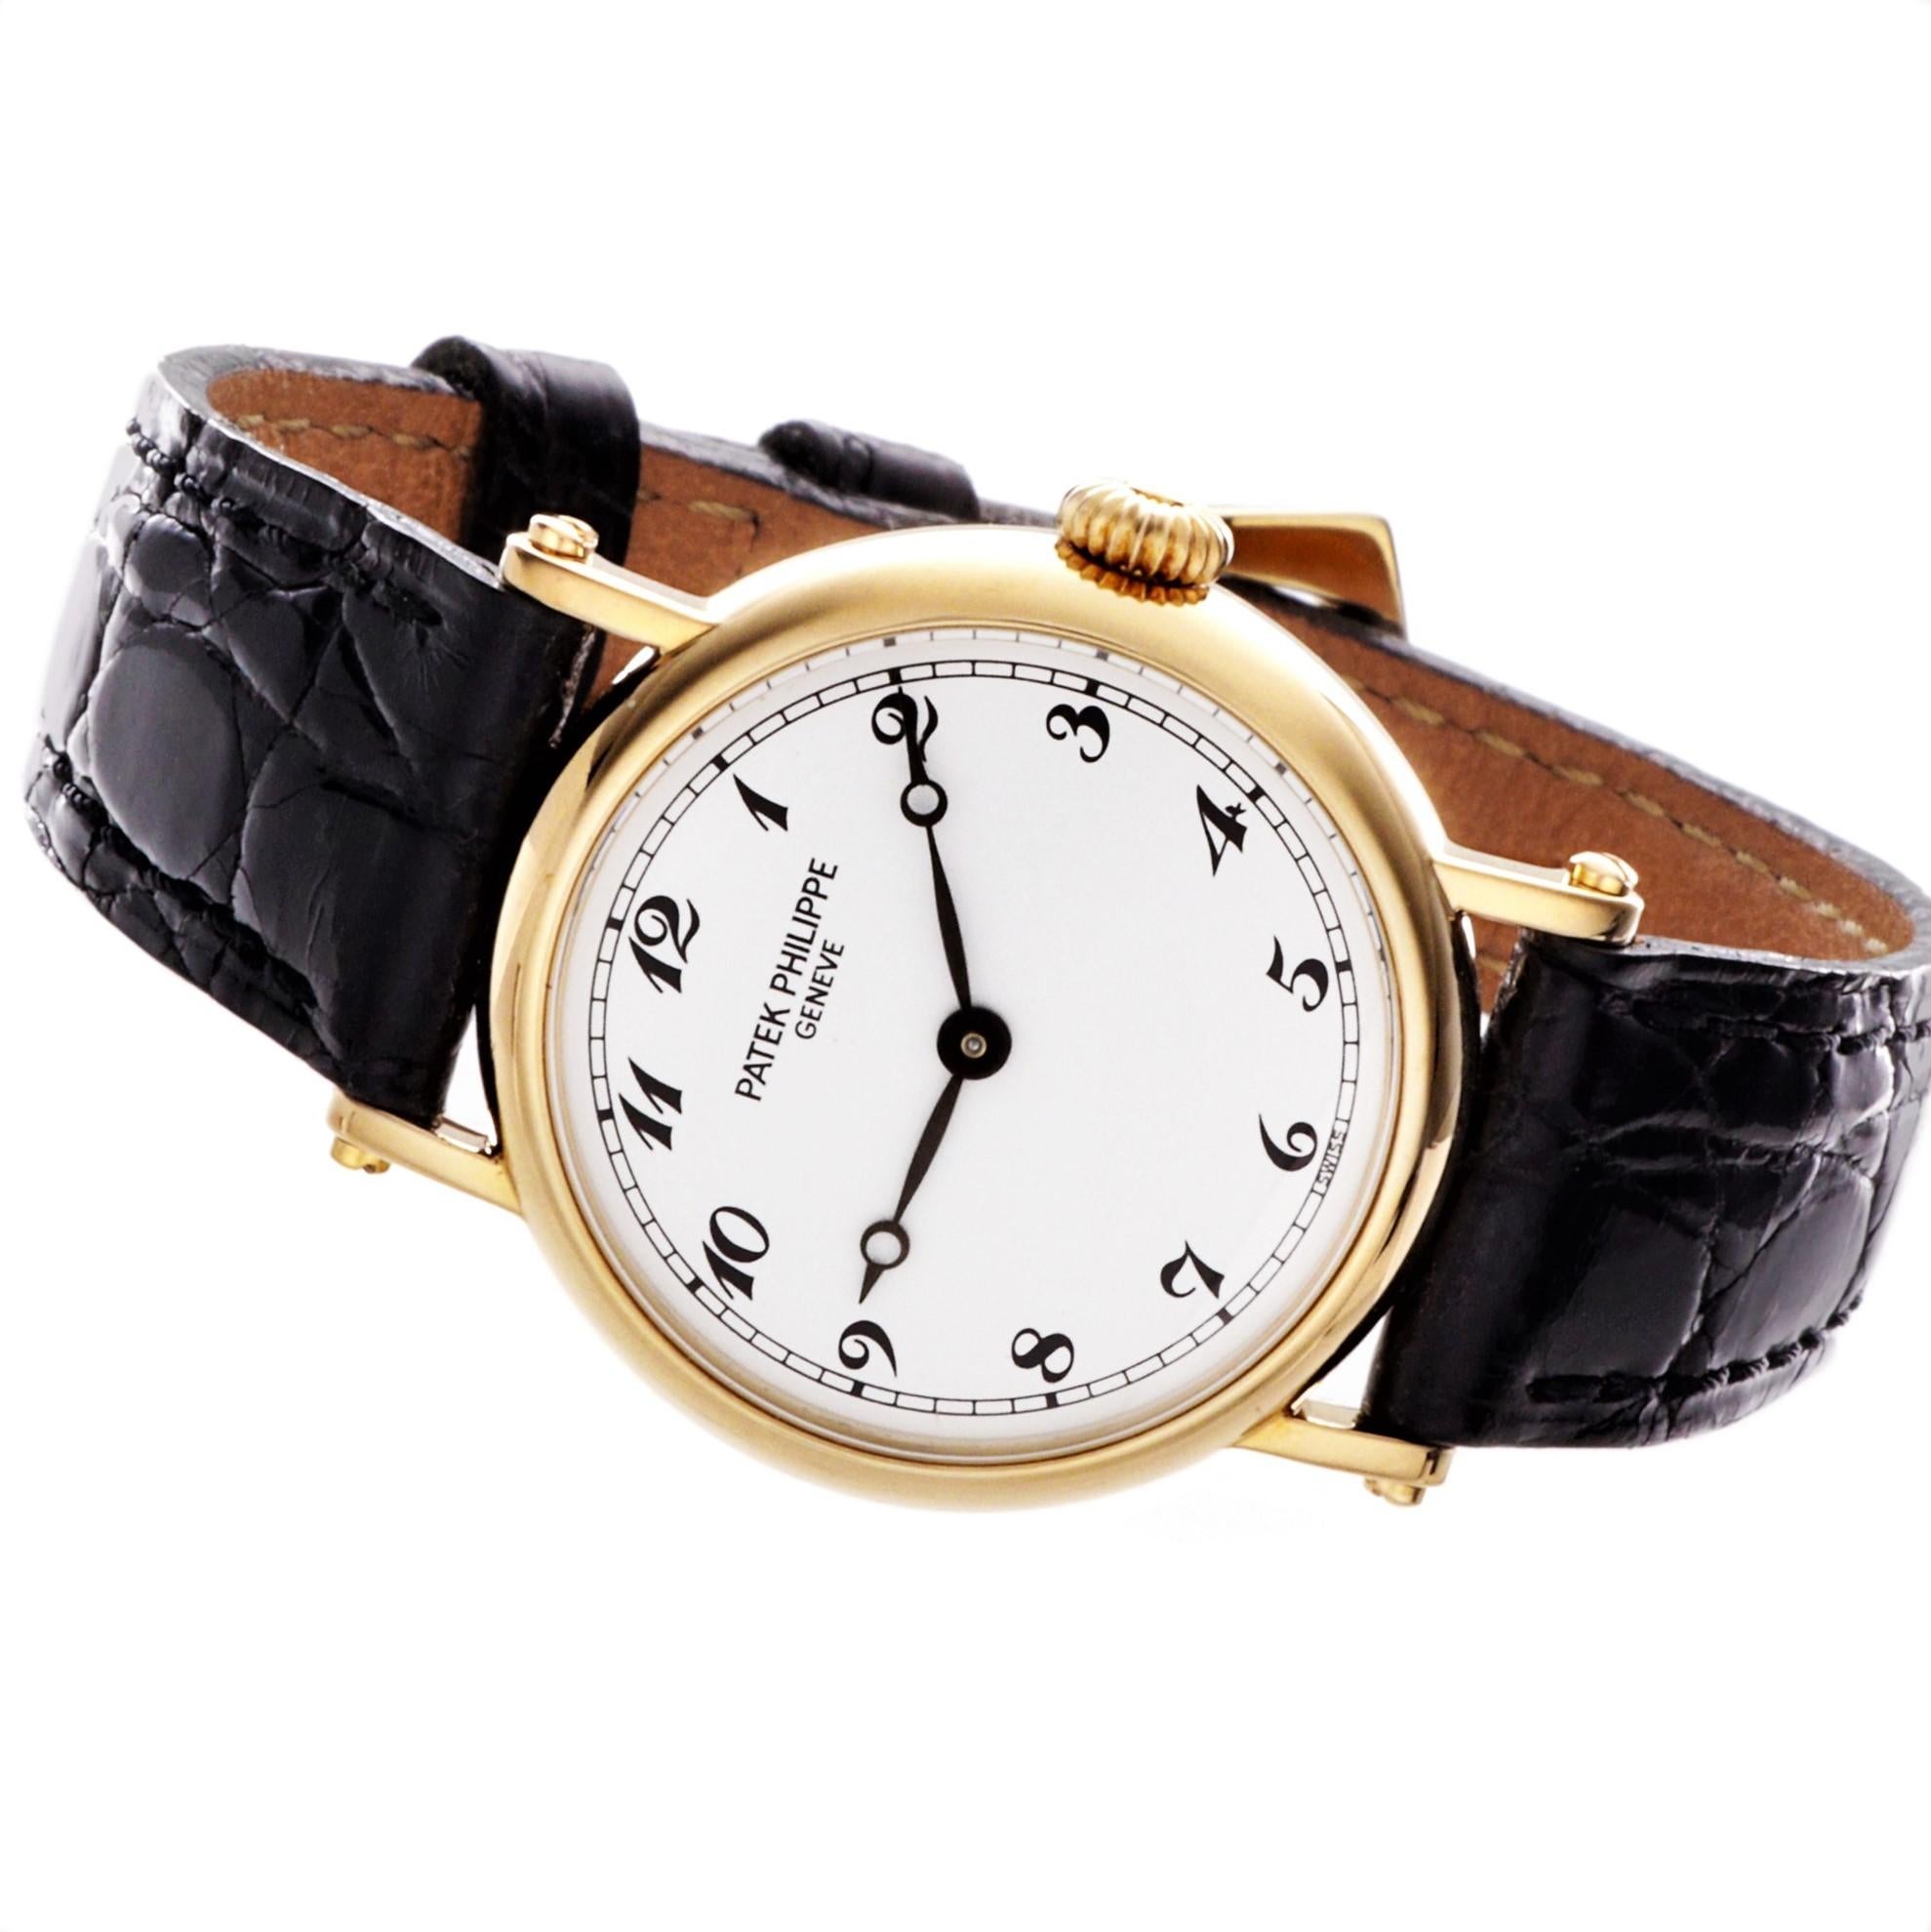 Patek Philippe 4860J Ladies Style Officers Case Calatrava.
The watch made in 18K yellow gold with a porcelain white dial and black Breguet numbers and hands,  The case measures 26mm.  The watch is fitted with a 16-250 caliber 18-jewel movement #